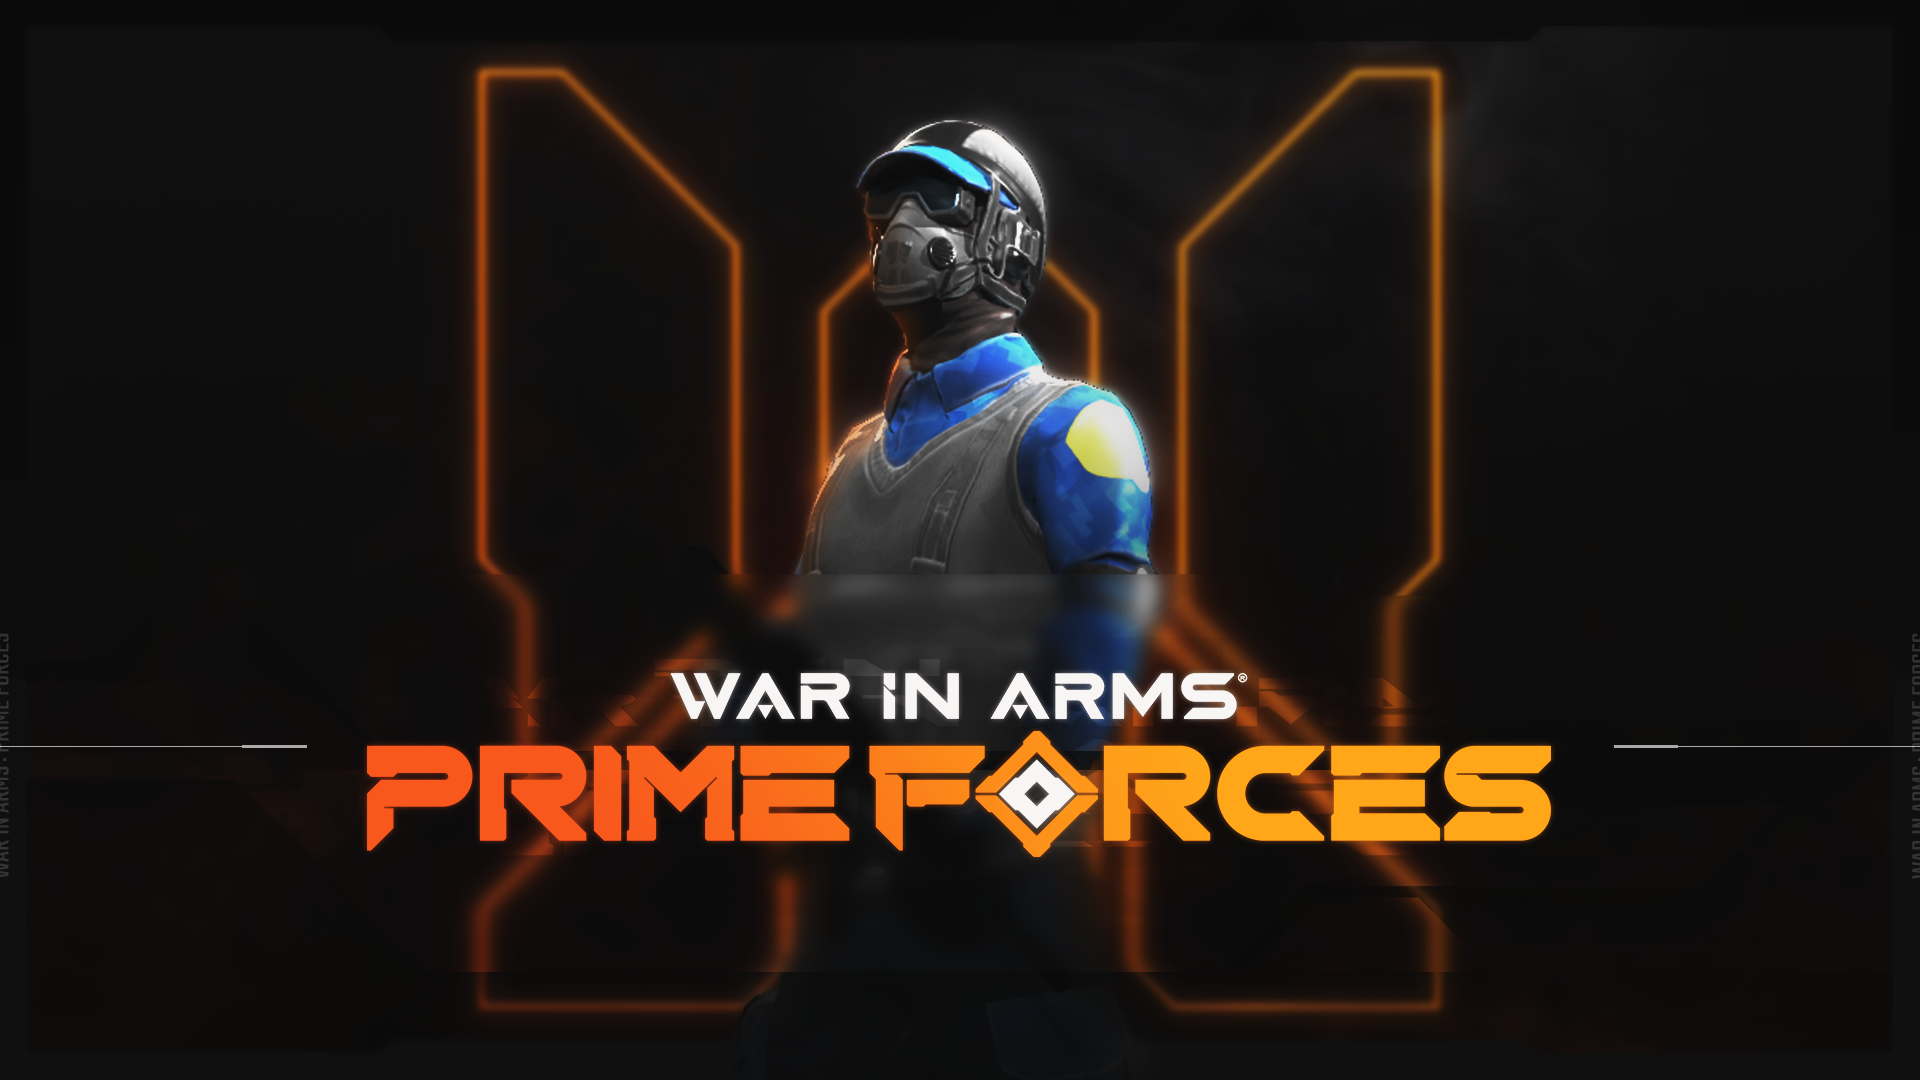 WAR IN ARMS: PRIME FORCES CQB 게임 스크린 샷